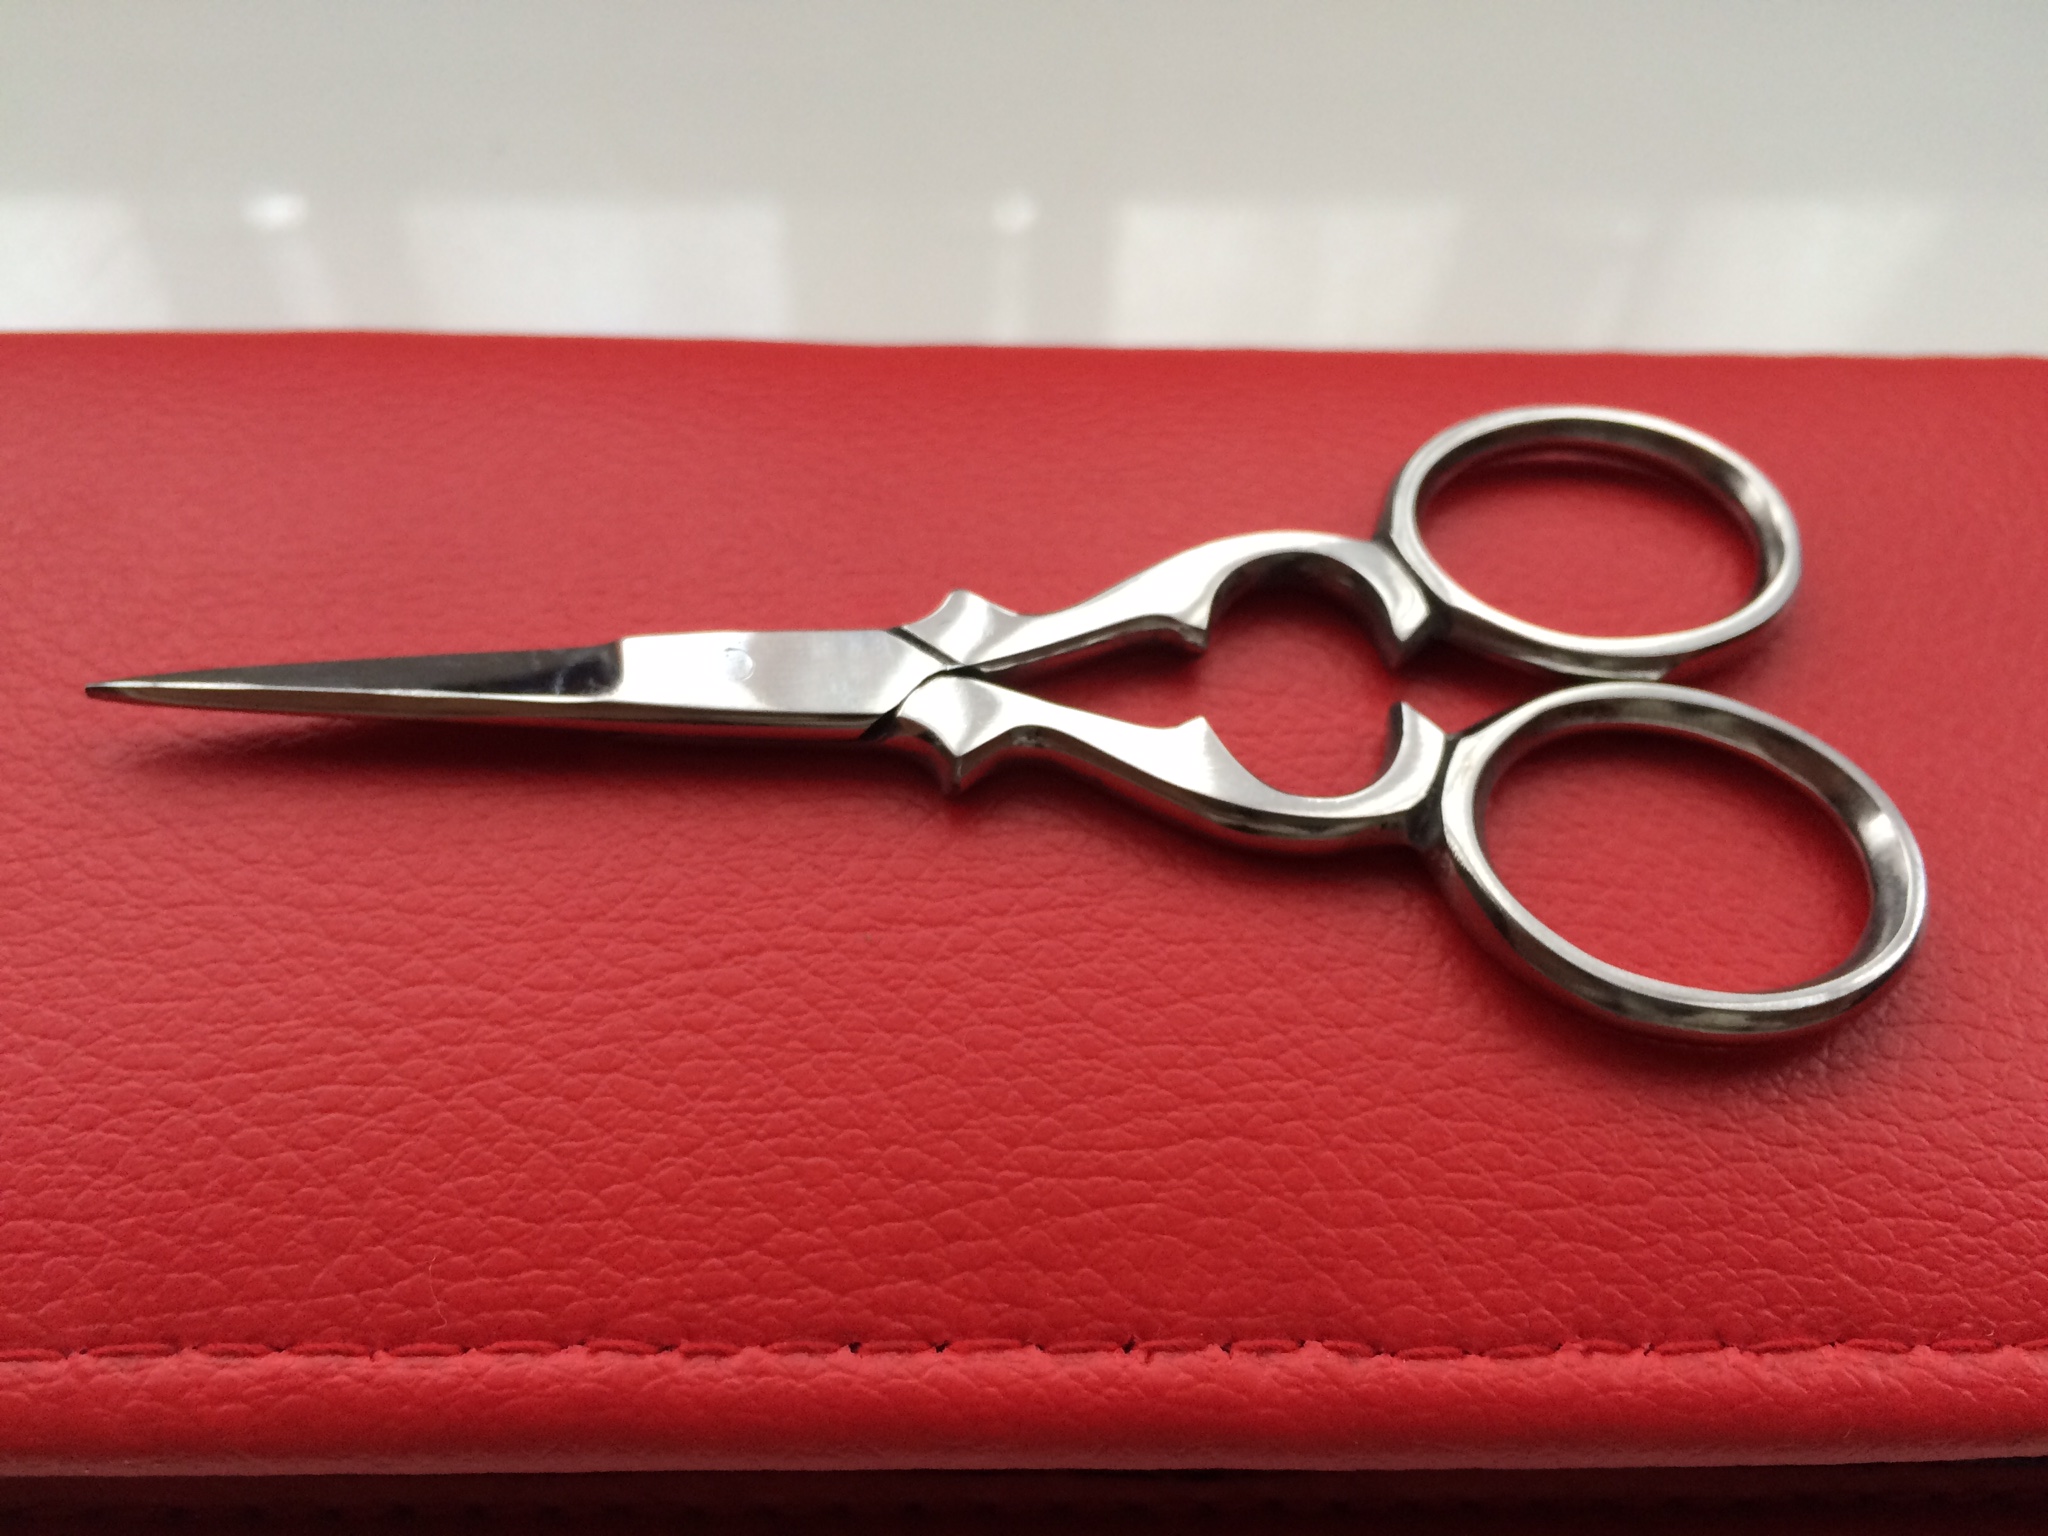 Small scissors for manicure pedicure and much more